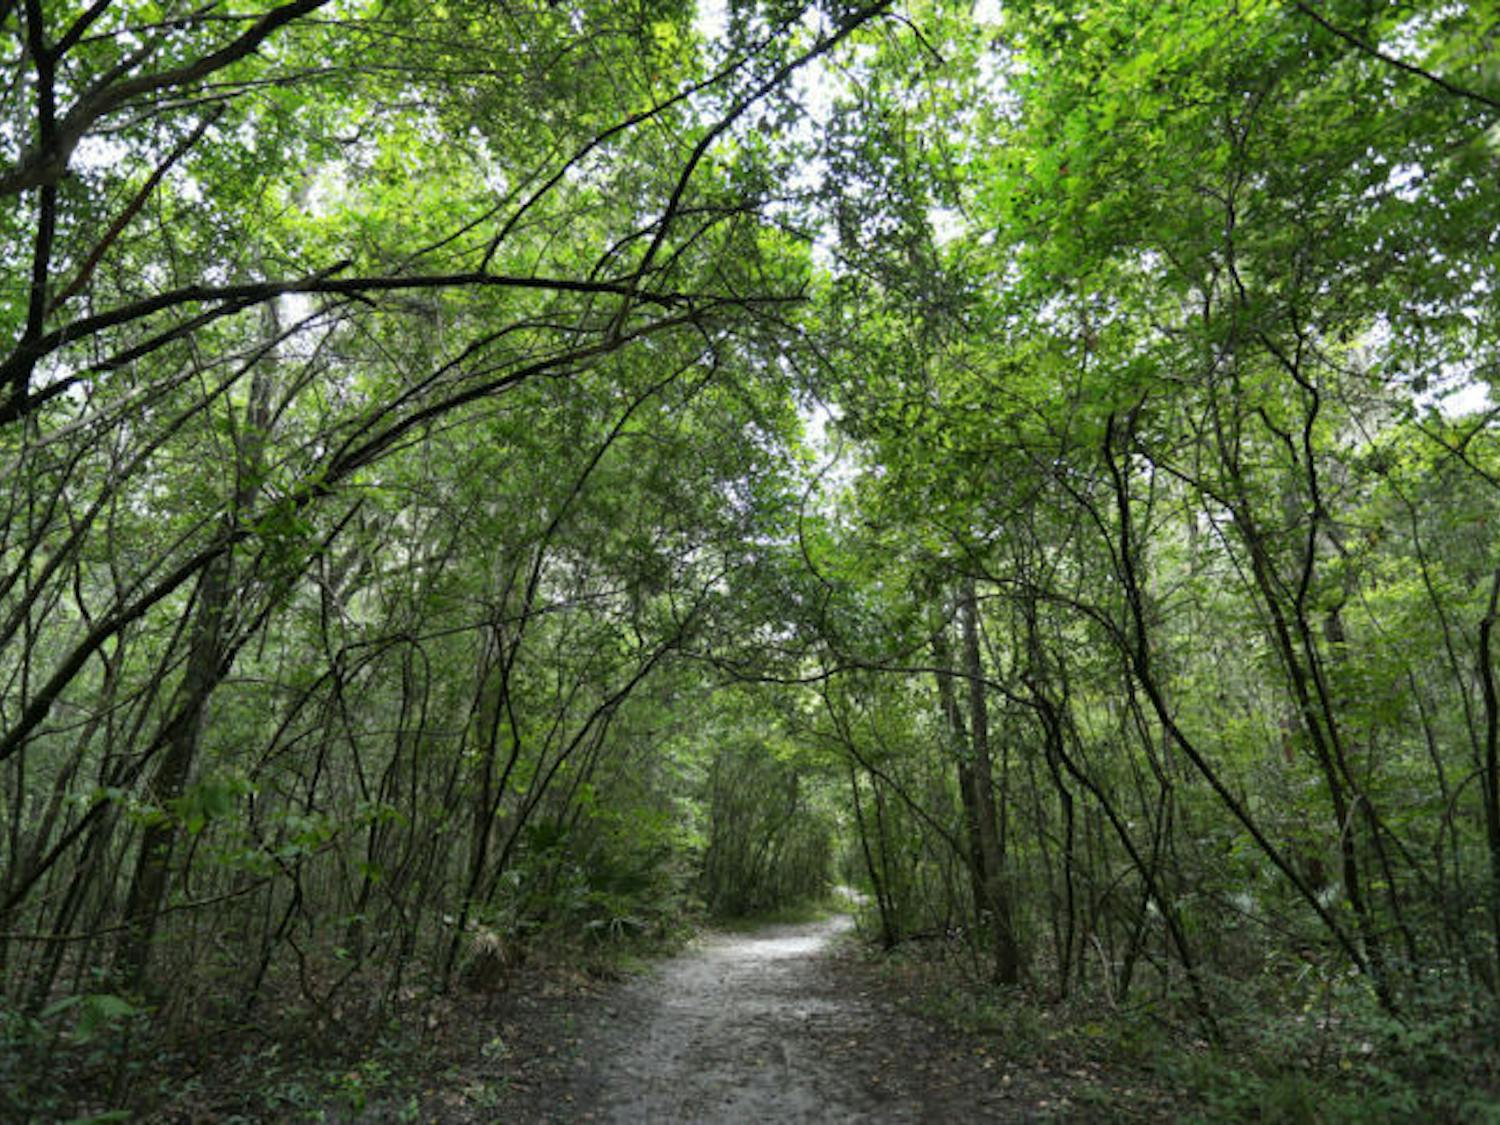 Loblolly Woods, a city-owned property about 10 minutes away from Midtown, is potentially up for sale. Activists organized an awareness hike along its trails on Sunday.